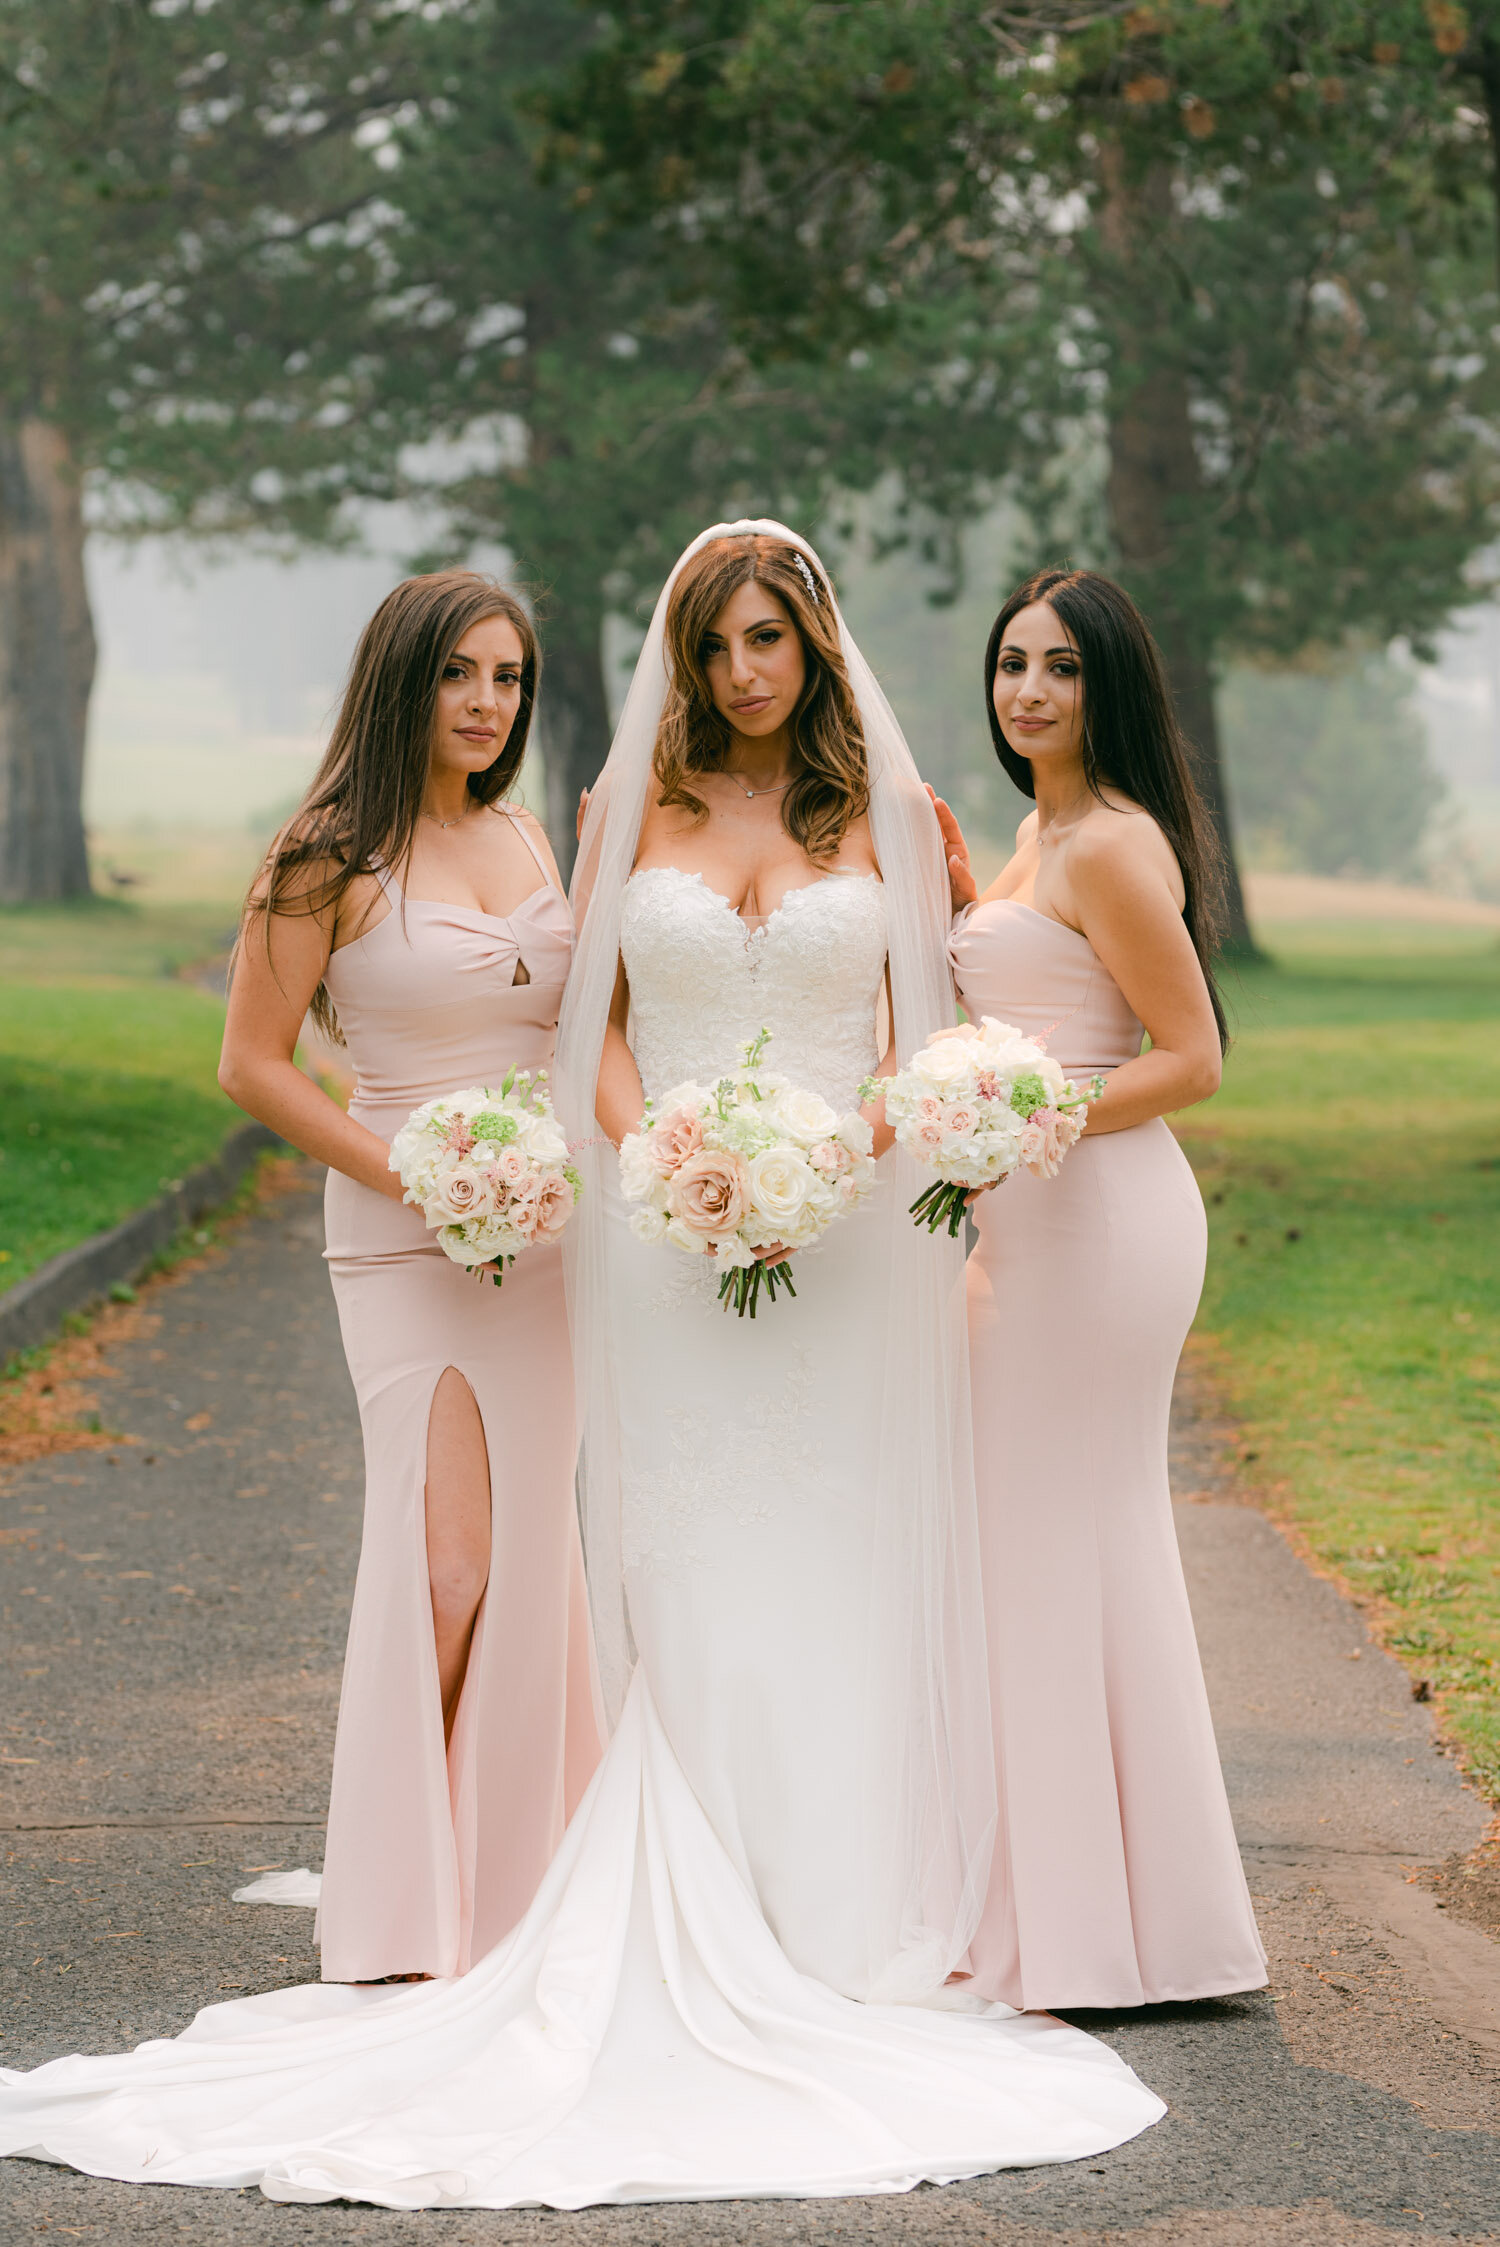 Palisades Wedding, photo of bride with her bridesmaids. Bridesmaids are wearing pink strapless dresses. 